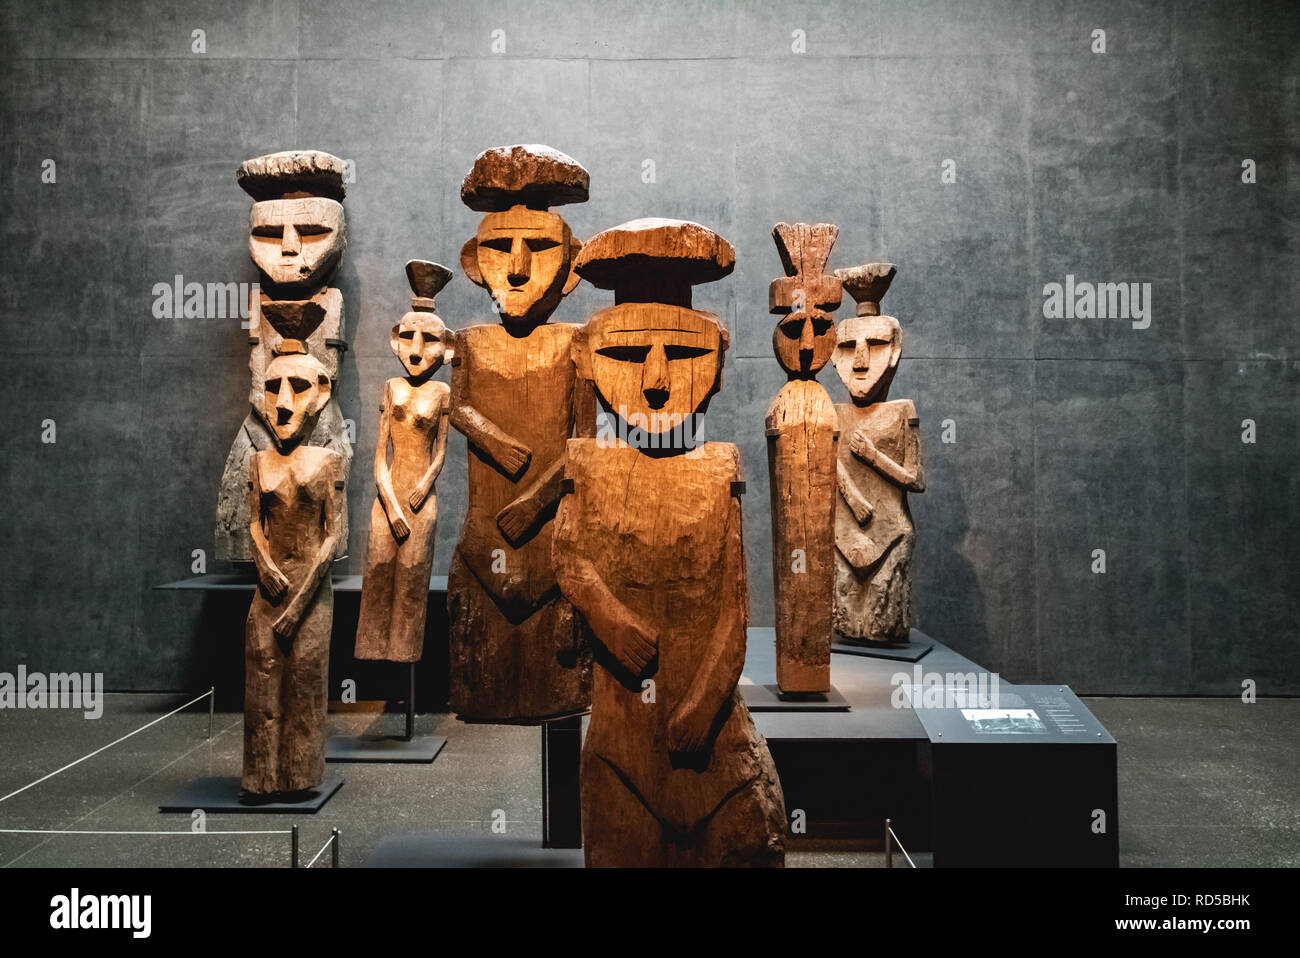 Chemamull wood statues at Pre-columbian Art Museum - Santiago, Chile Stock Photo